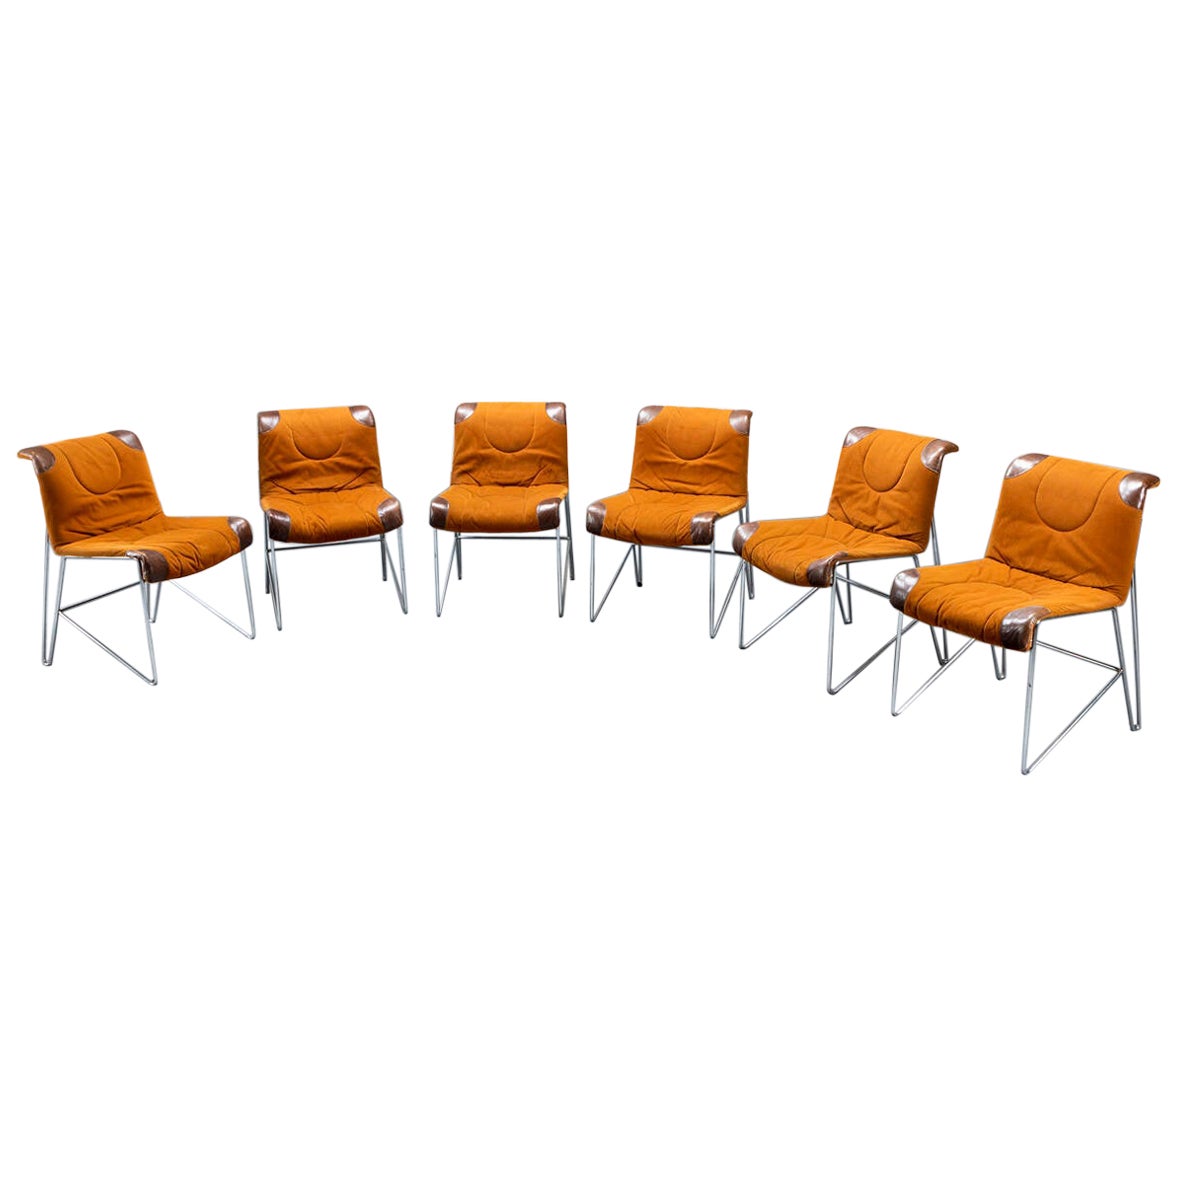 Six Orange Chairs by Guido Faleschini
Tubular Steel Structure, Leather and Alcantara upholstery. 
Manufactured by Mariani, Italy, 1970s

Width 55 x Depth 80 x Height 63 Cm

Faleschini graduated in Architecture at the Atheneaum de Lousanne in 1960.